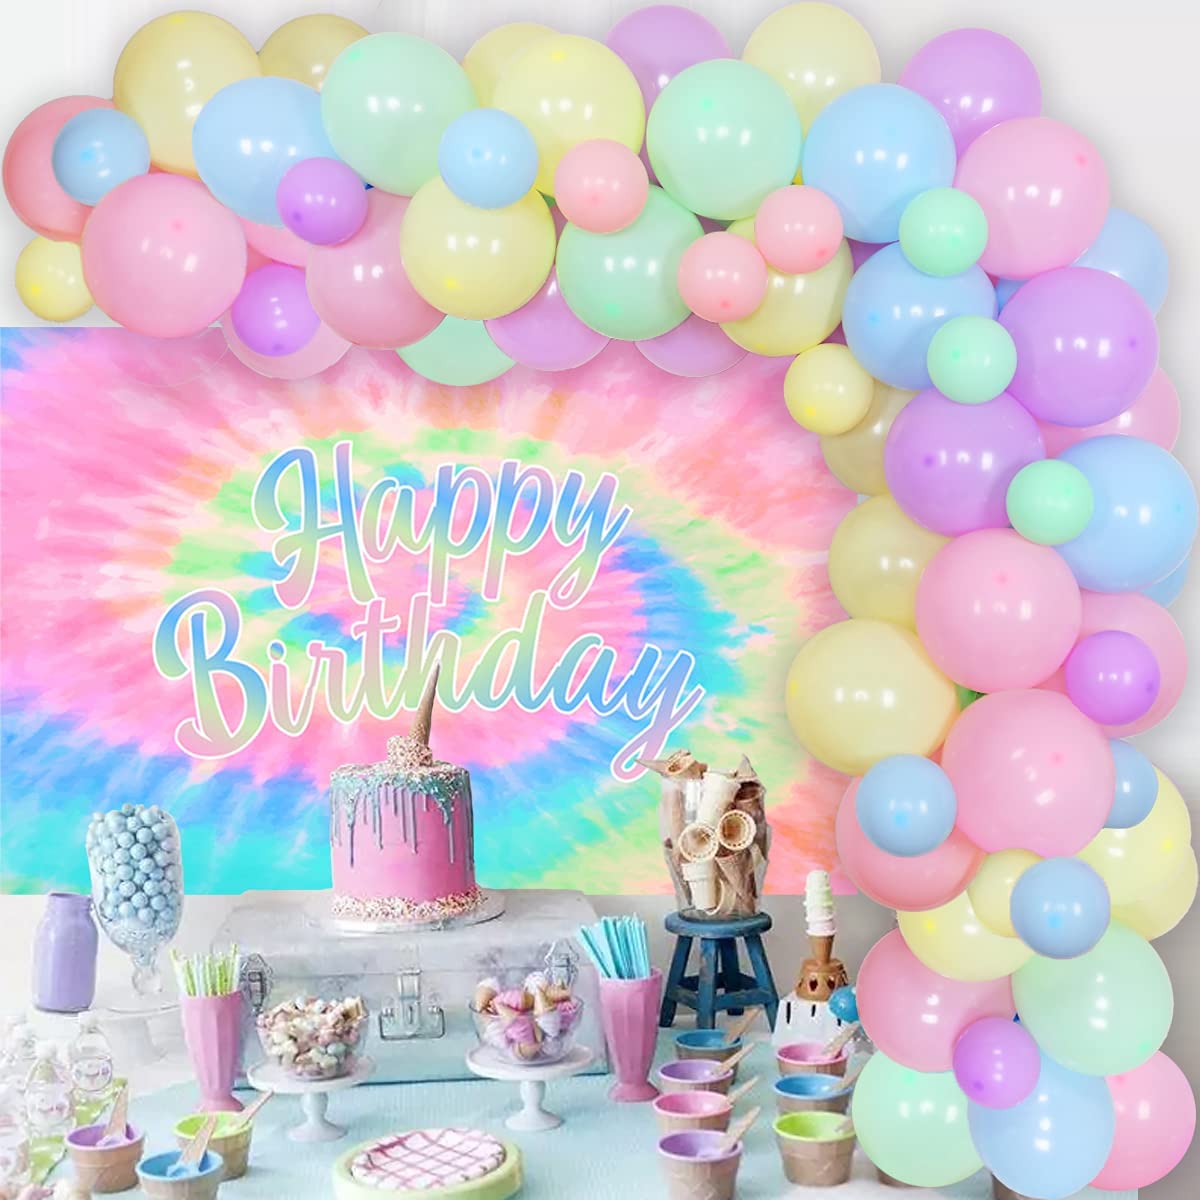 Tie Dye Birthday Decorations for Girls - Macaron Color Balloon Garland Kit  with Tie Dye Happy Birthday Backdrop Tie Dye Theme Birthday Party